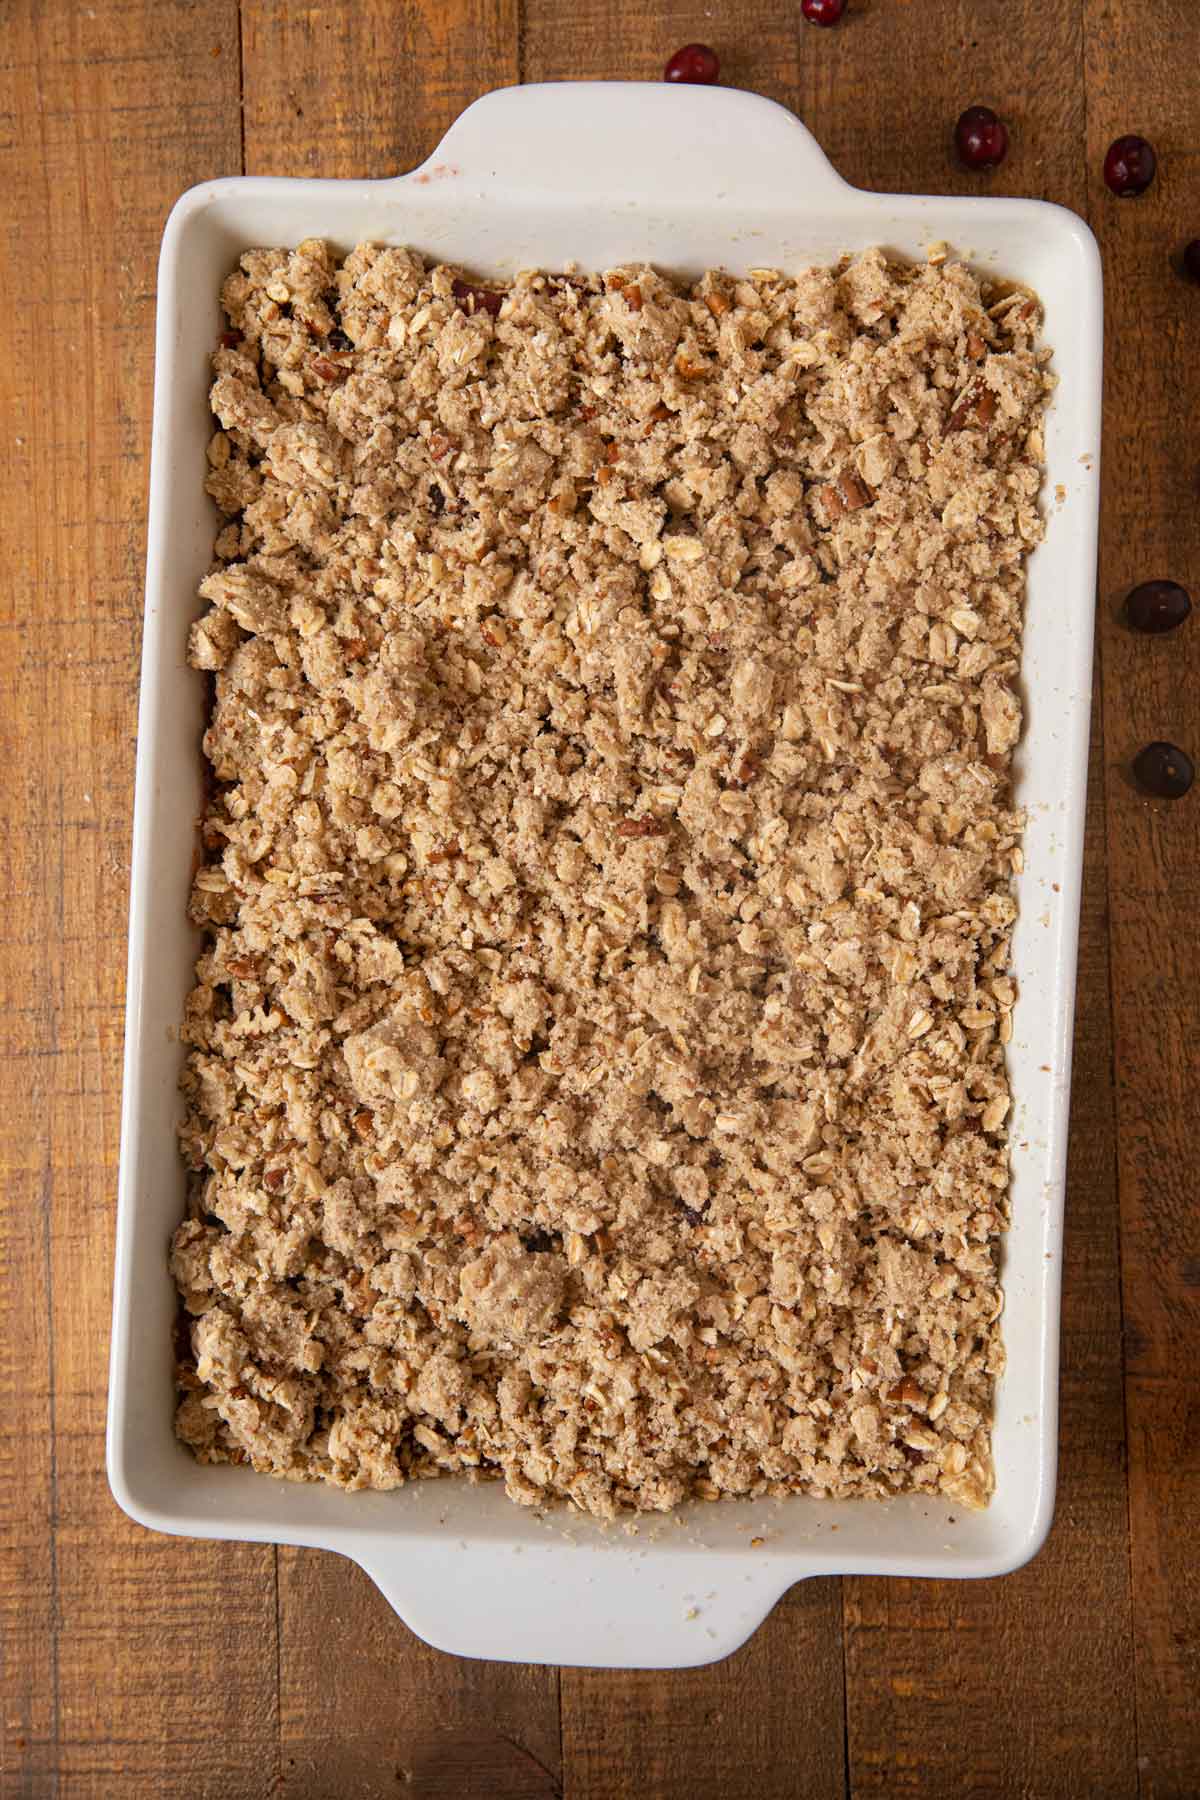 Cranberry Oat Bars in baking dish before baking